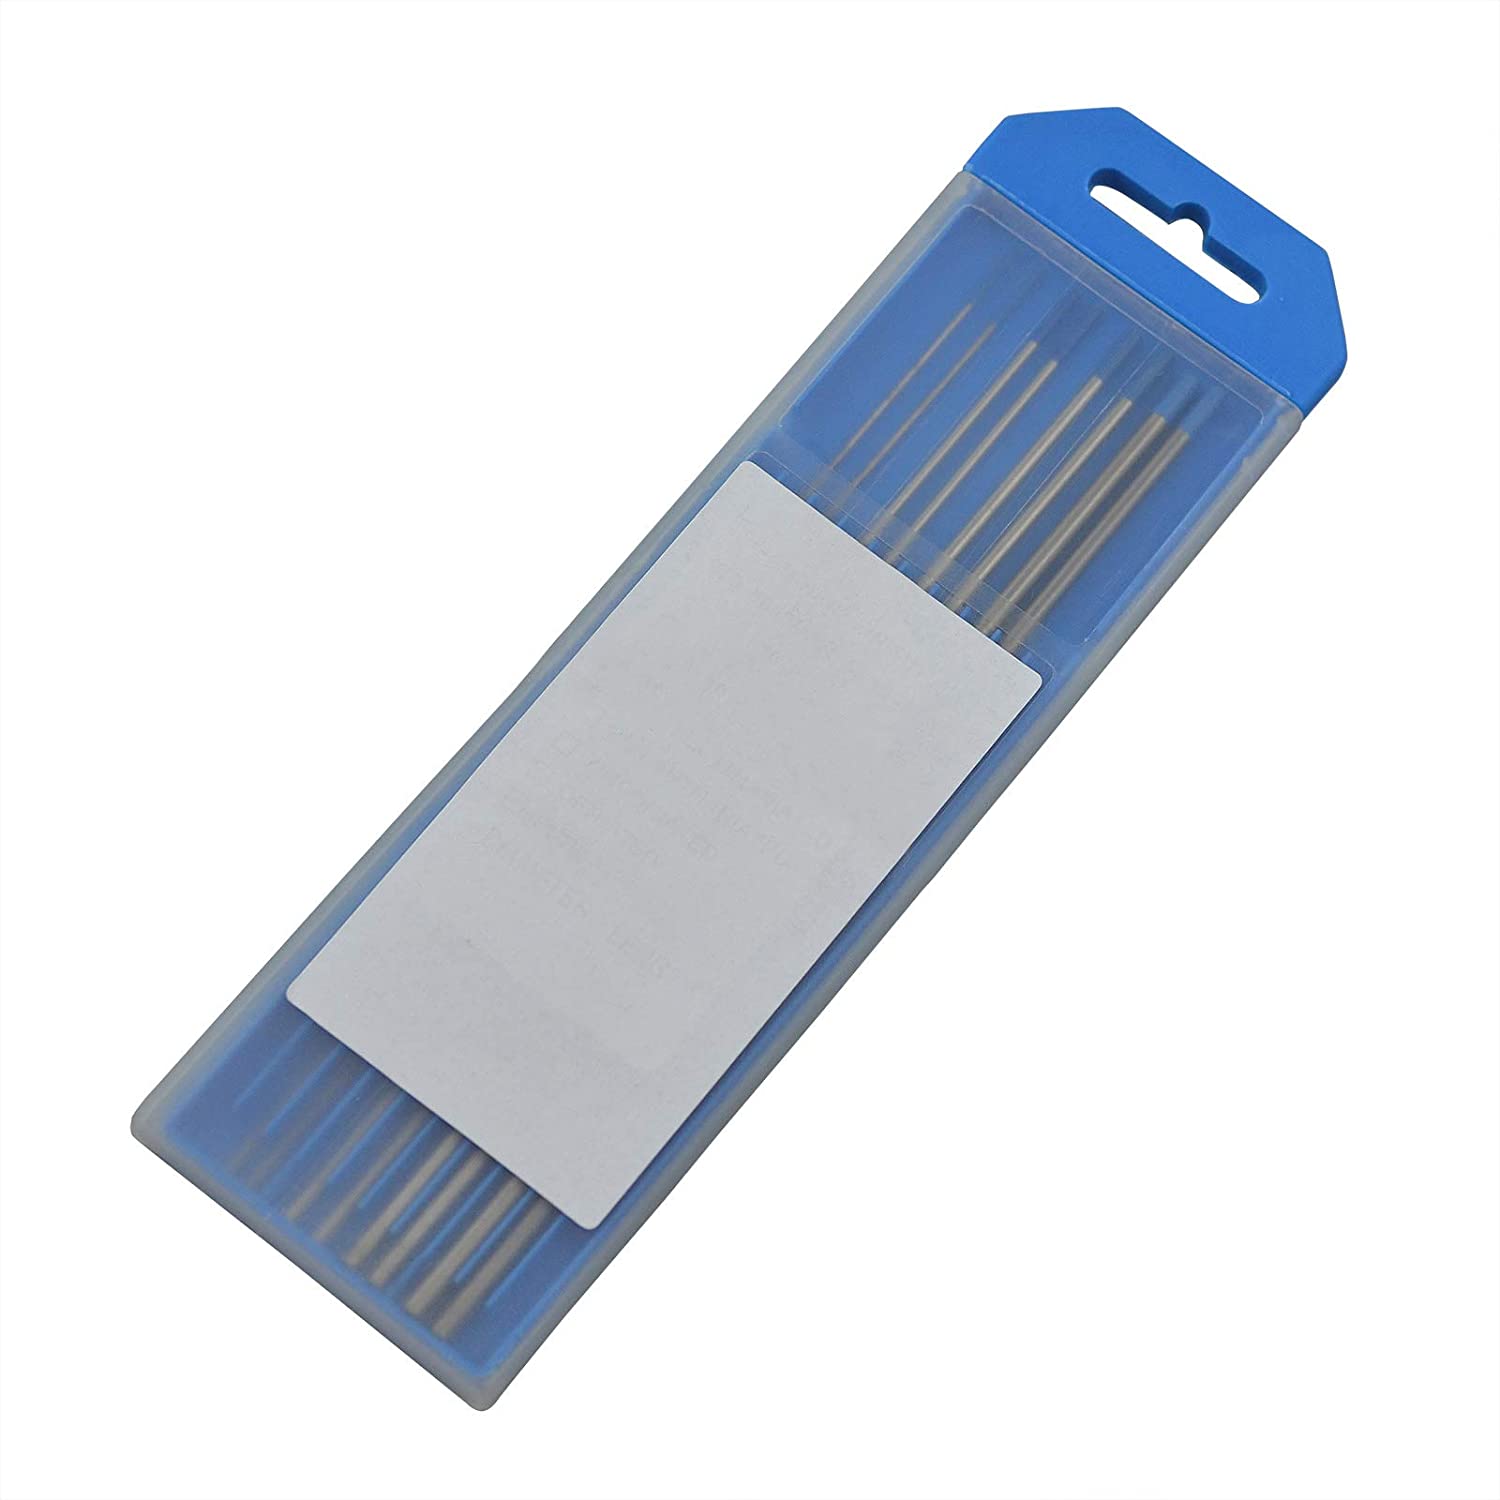 2 Percent Lanthanated WL20 TIG Tungsten Electrode Assorted Size 8pcs 